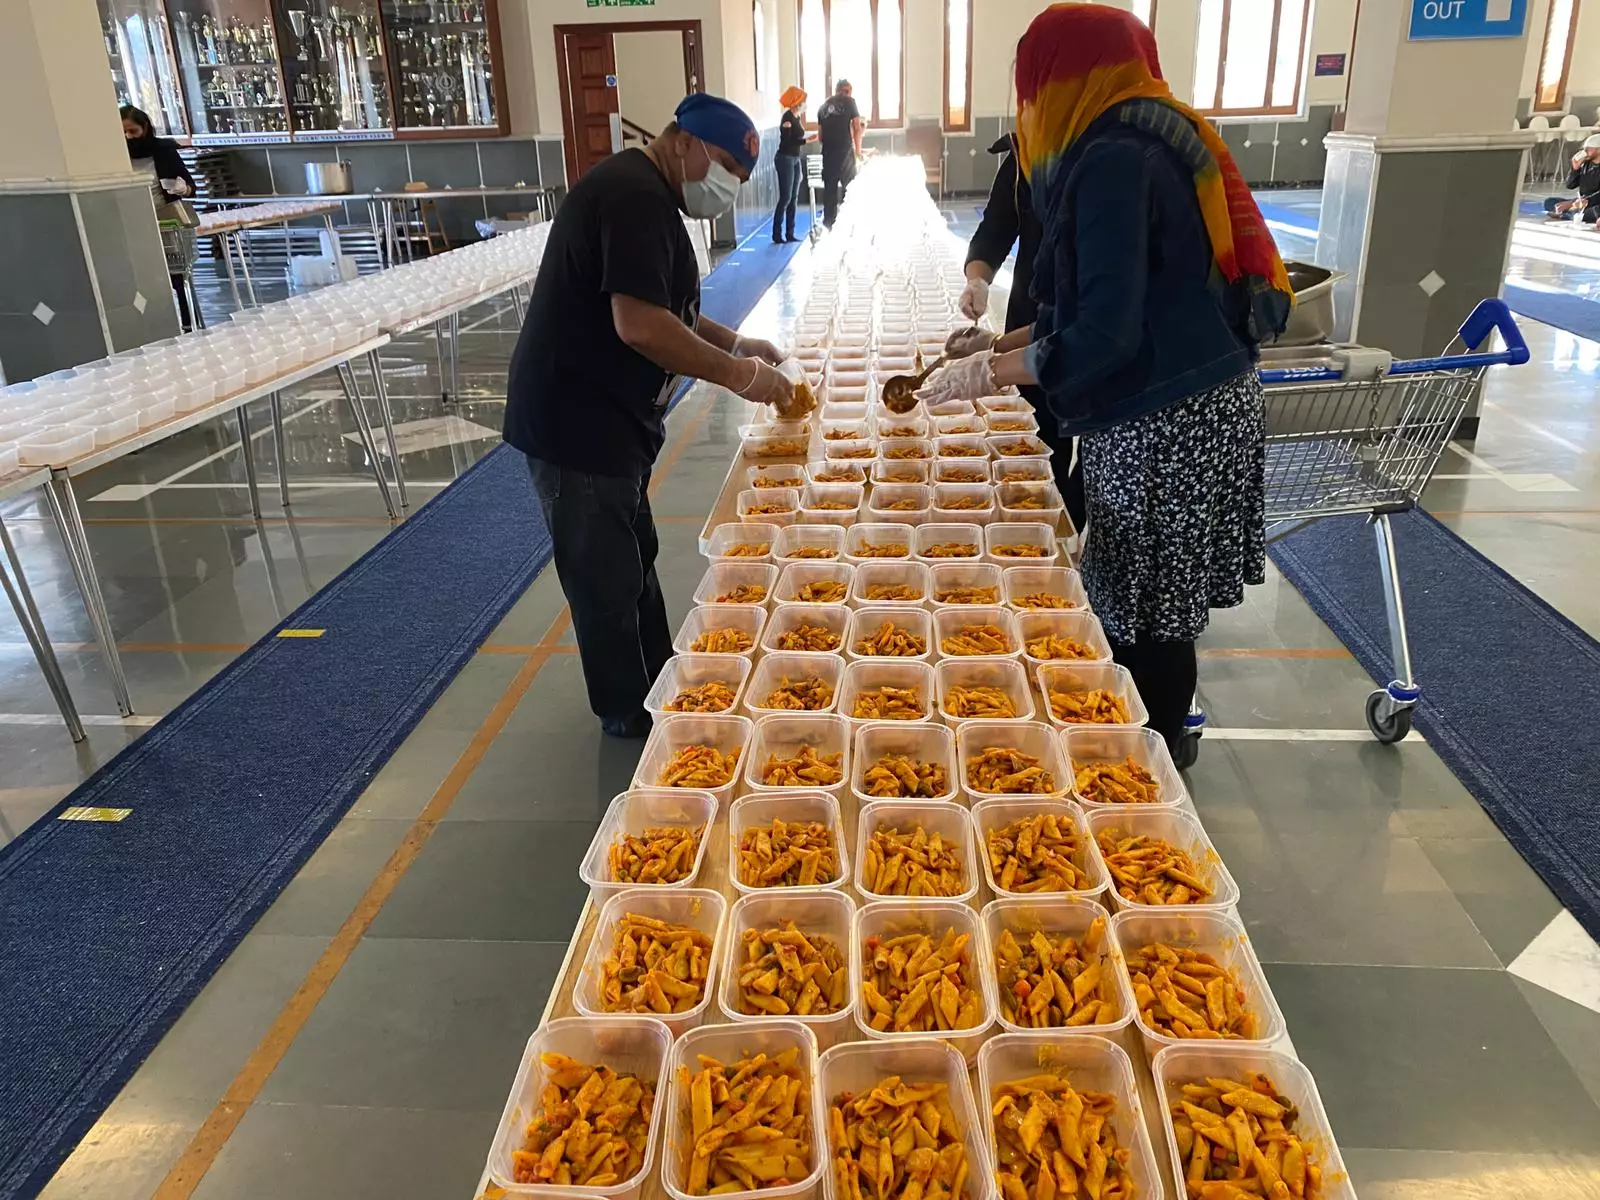 3,500 meals have now been made for the drivers stuck at the border.